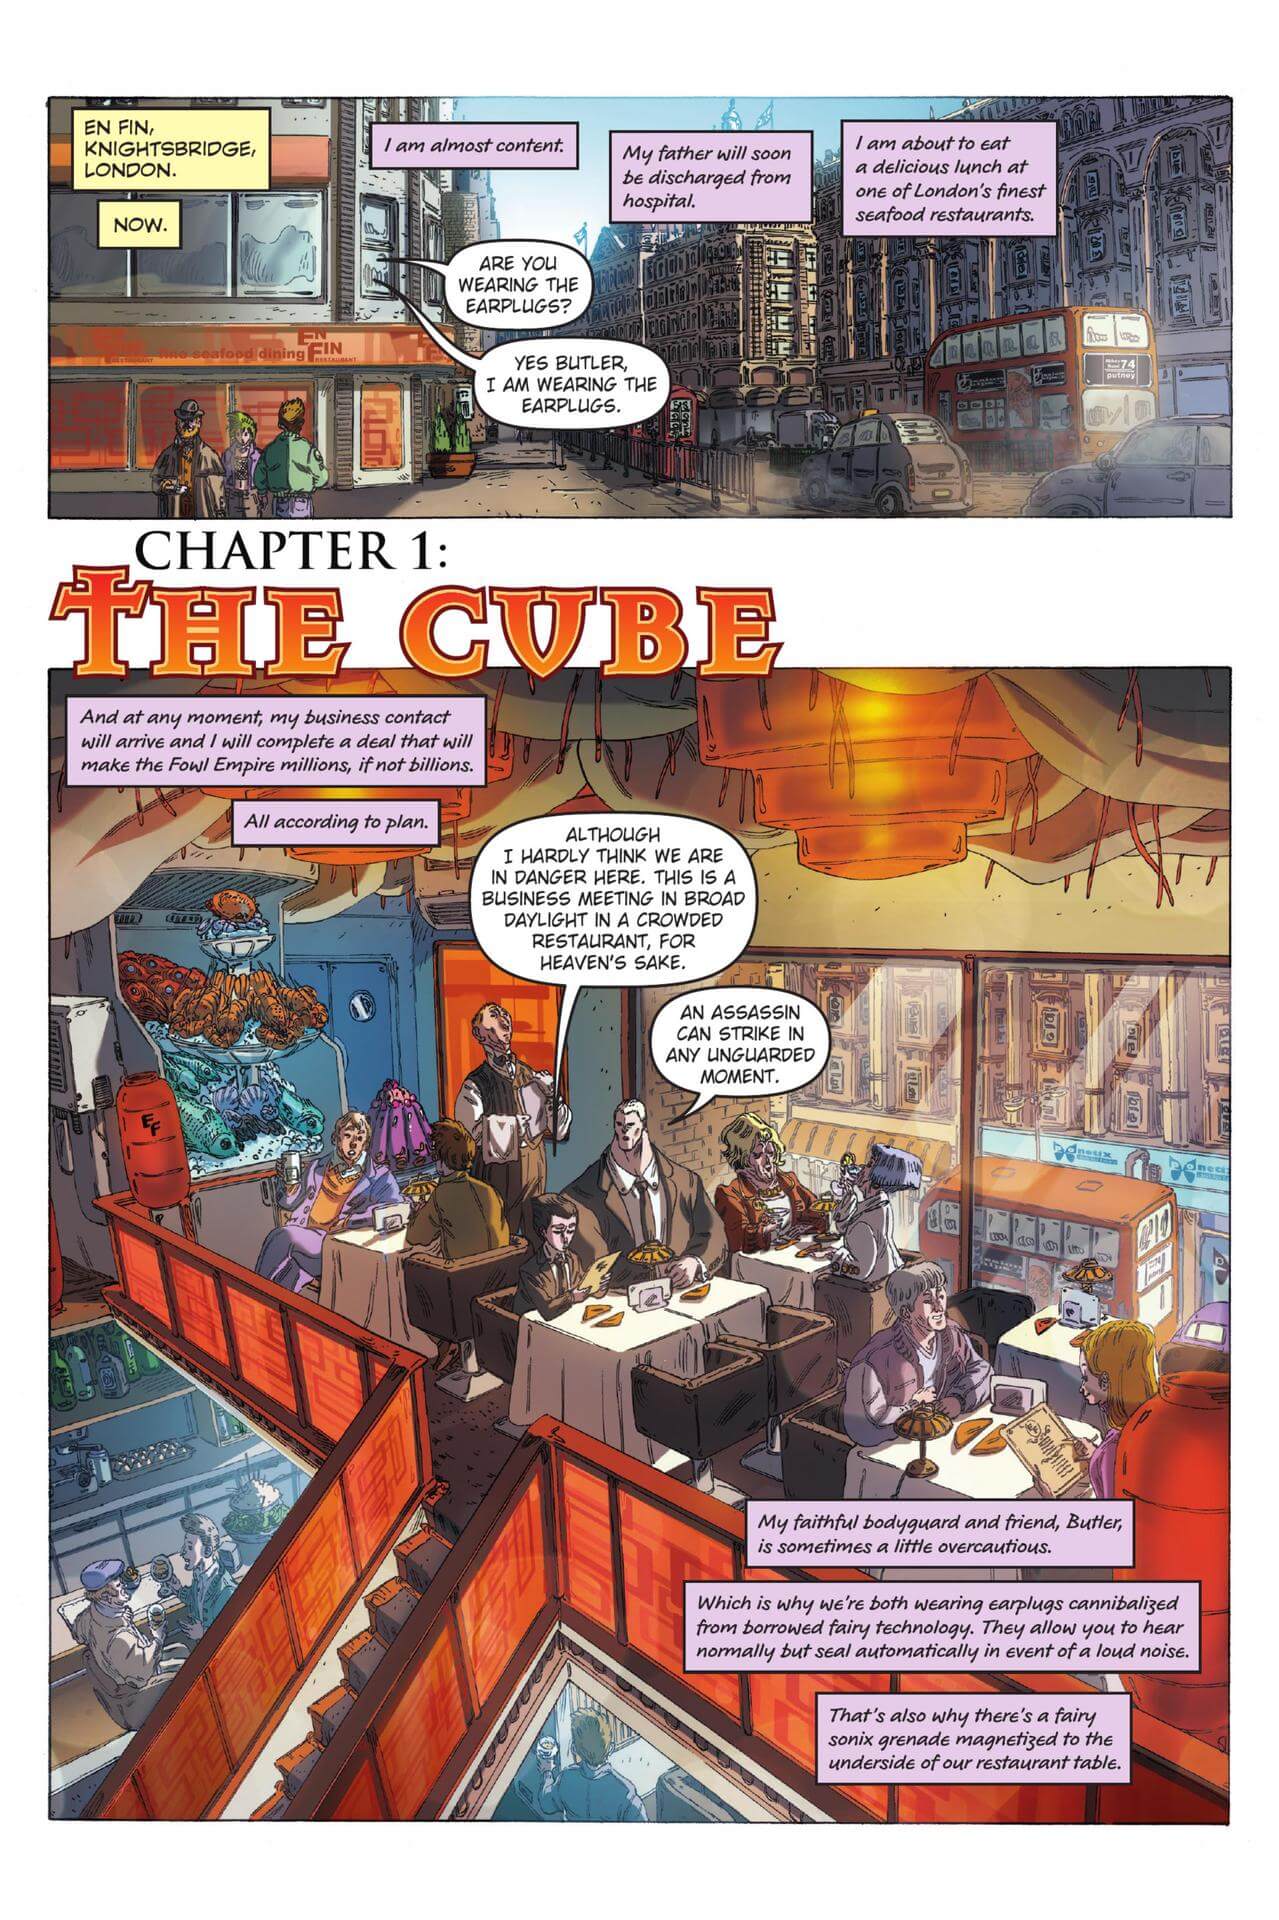 page 4 of artemis fowl eternity code graphic novel